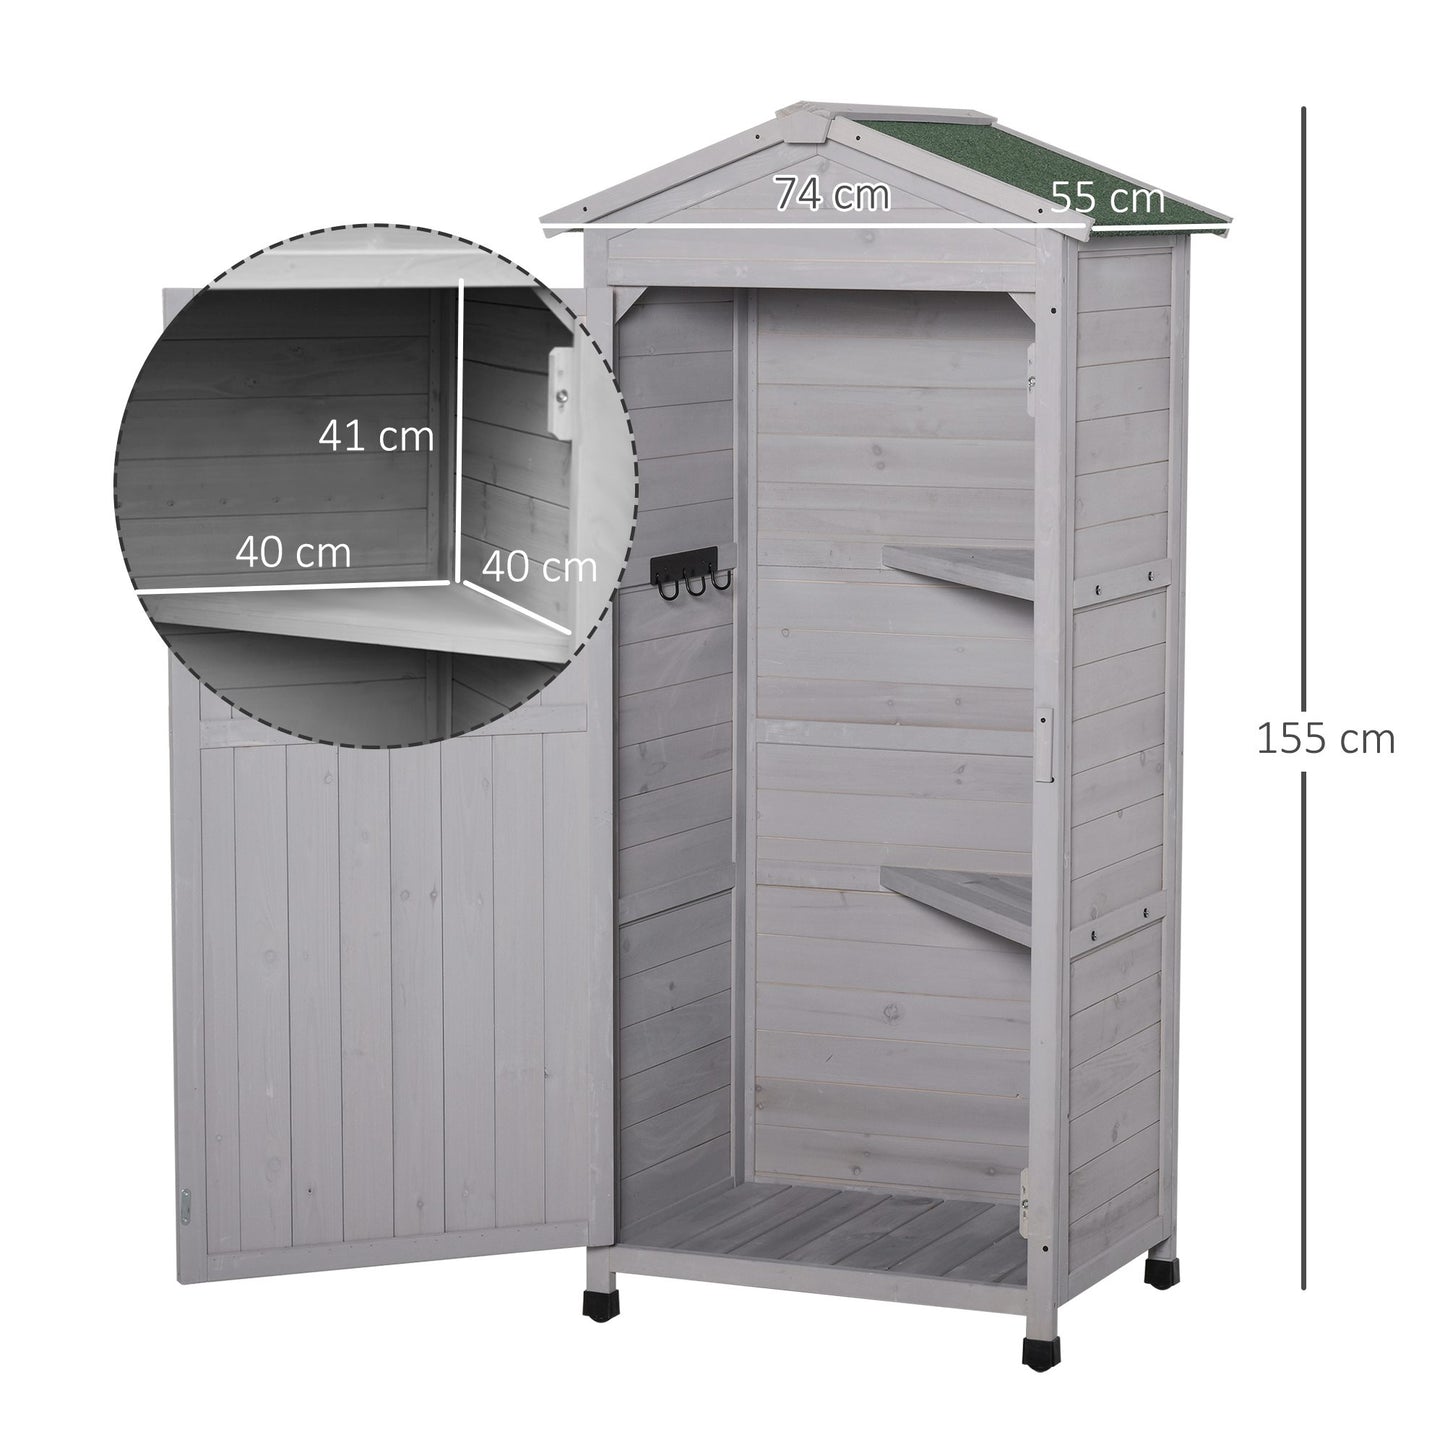 Outsunny Wooden Garden Cabinet 3-Tier Storage Shed 2 Shelves Lockable Organizer with Hooks Foot Pad 74 x 55 x 155cm Light Grey Hook